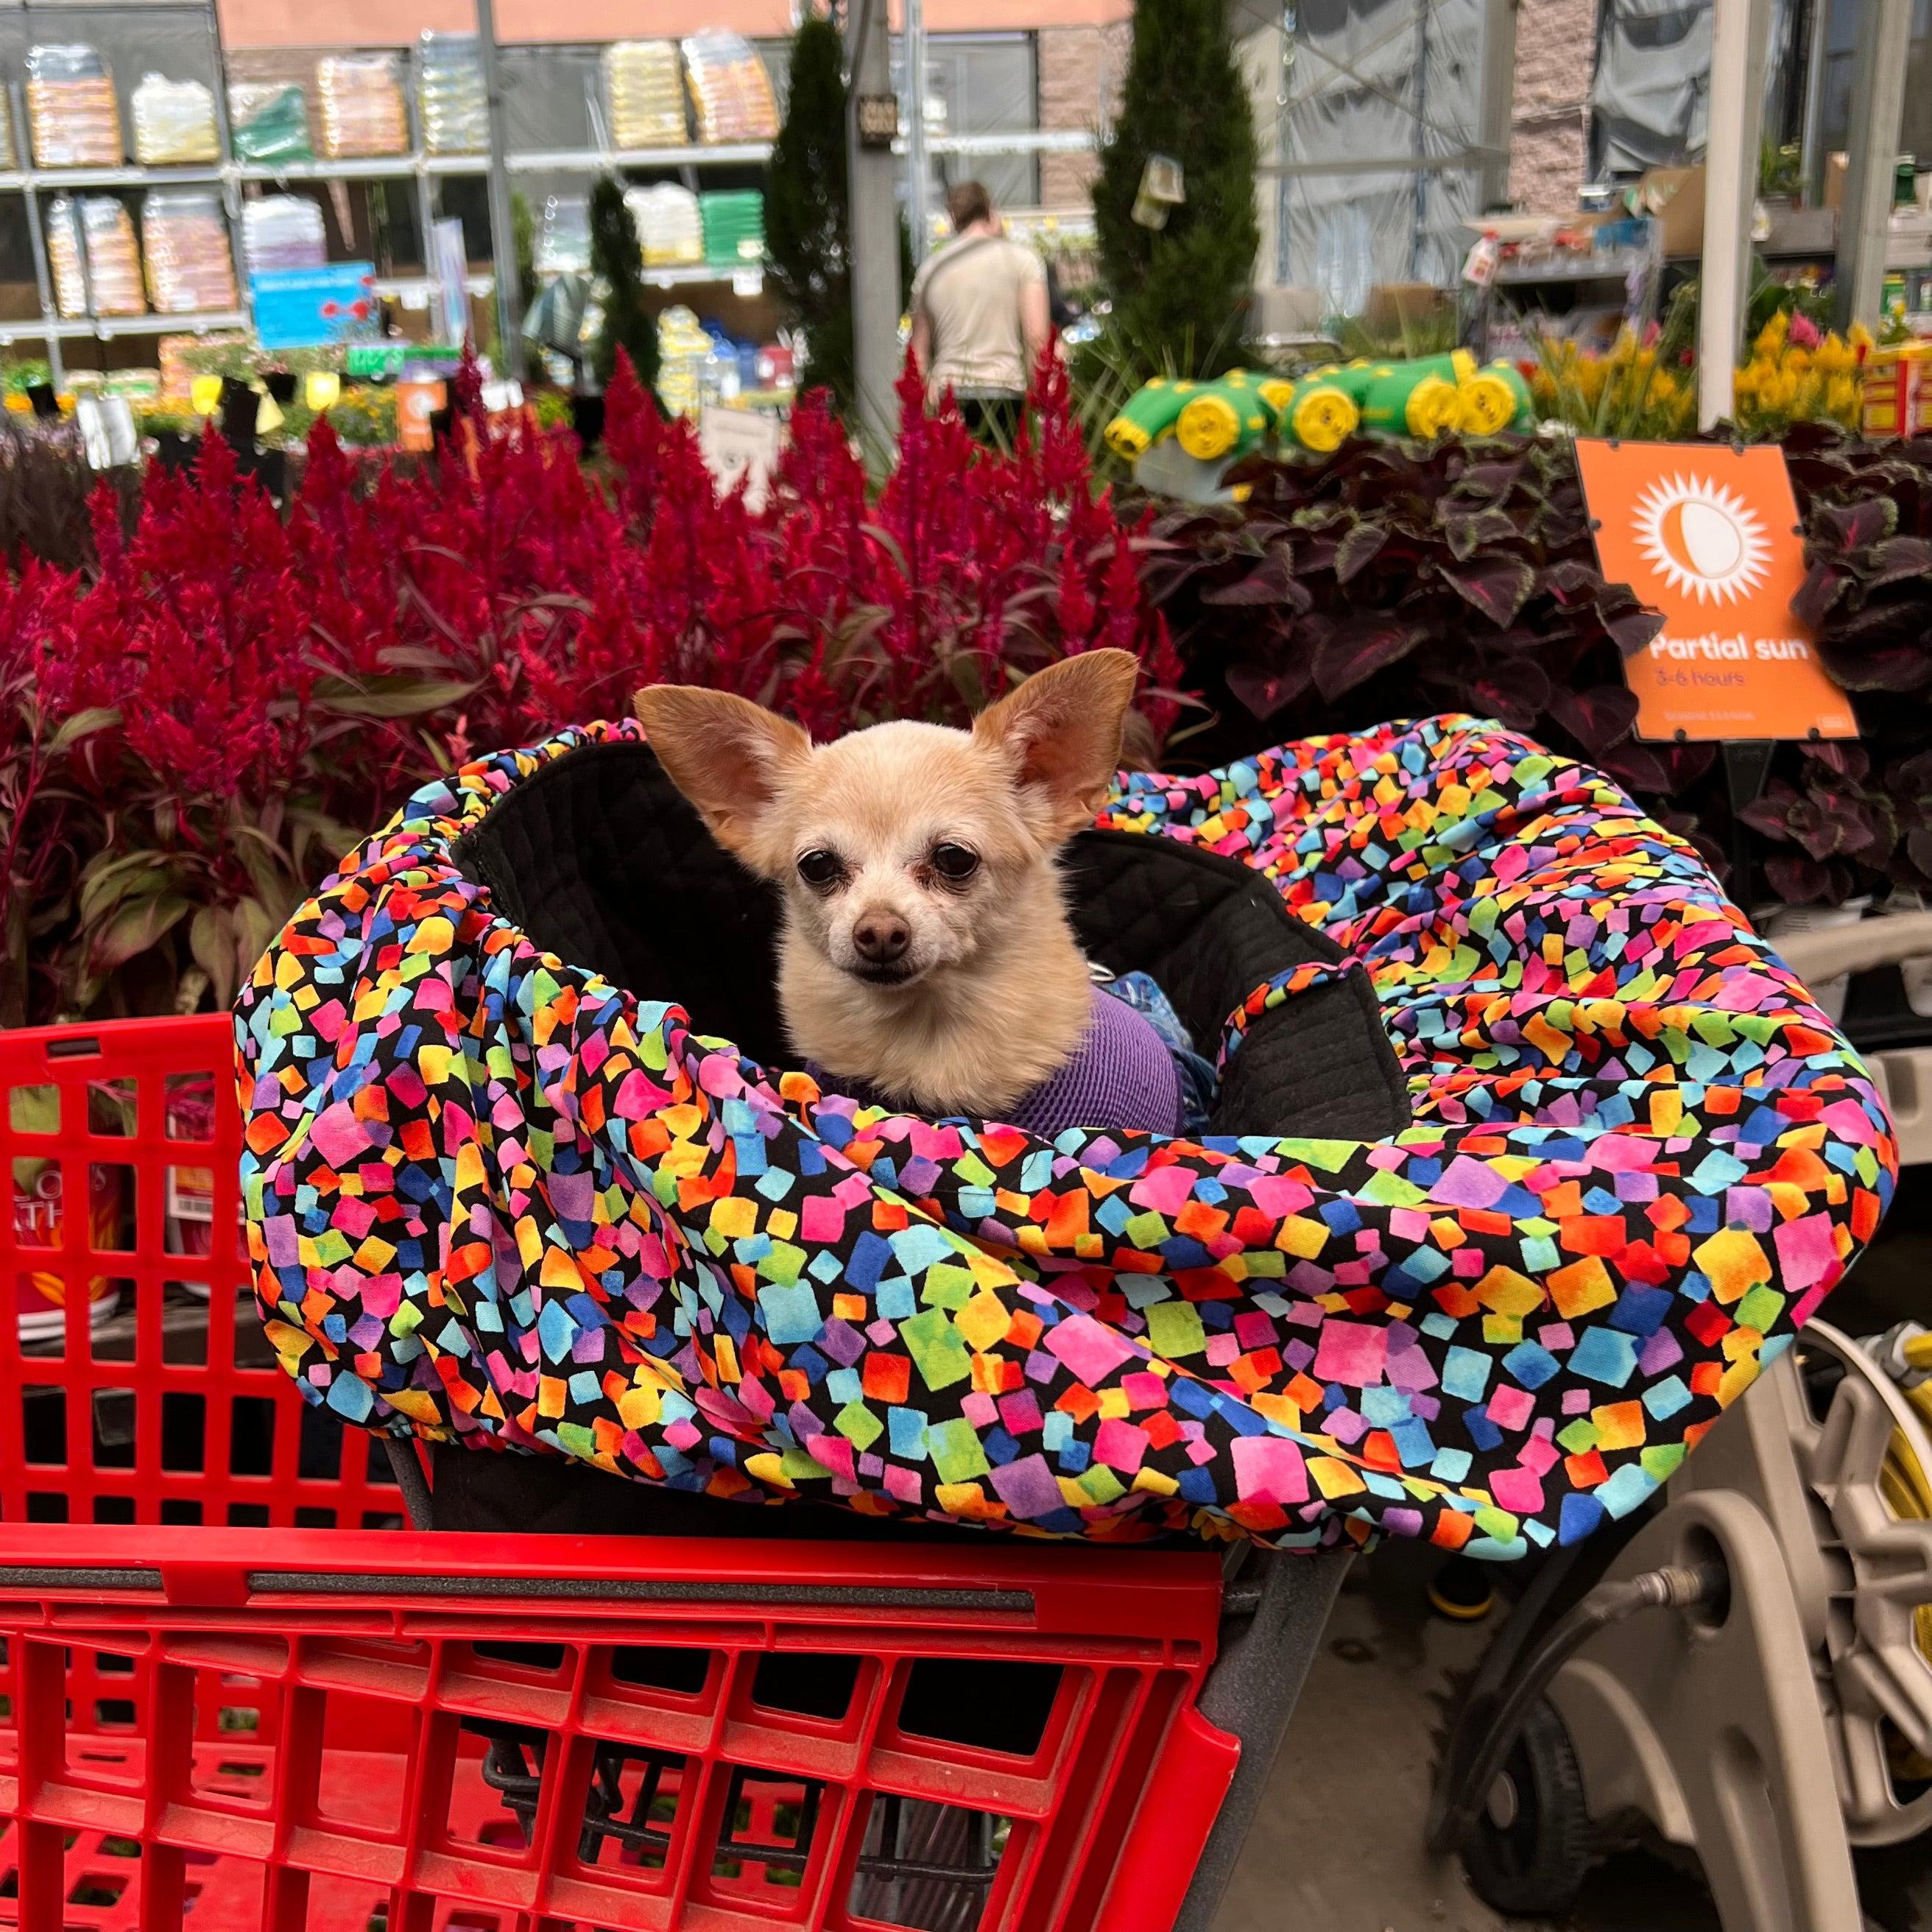 Shopping Cart Cover - Cart Seat Cover